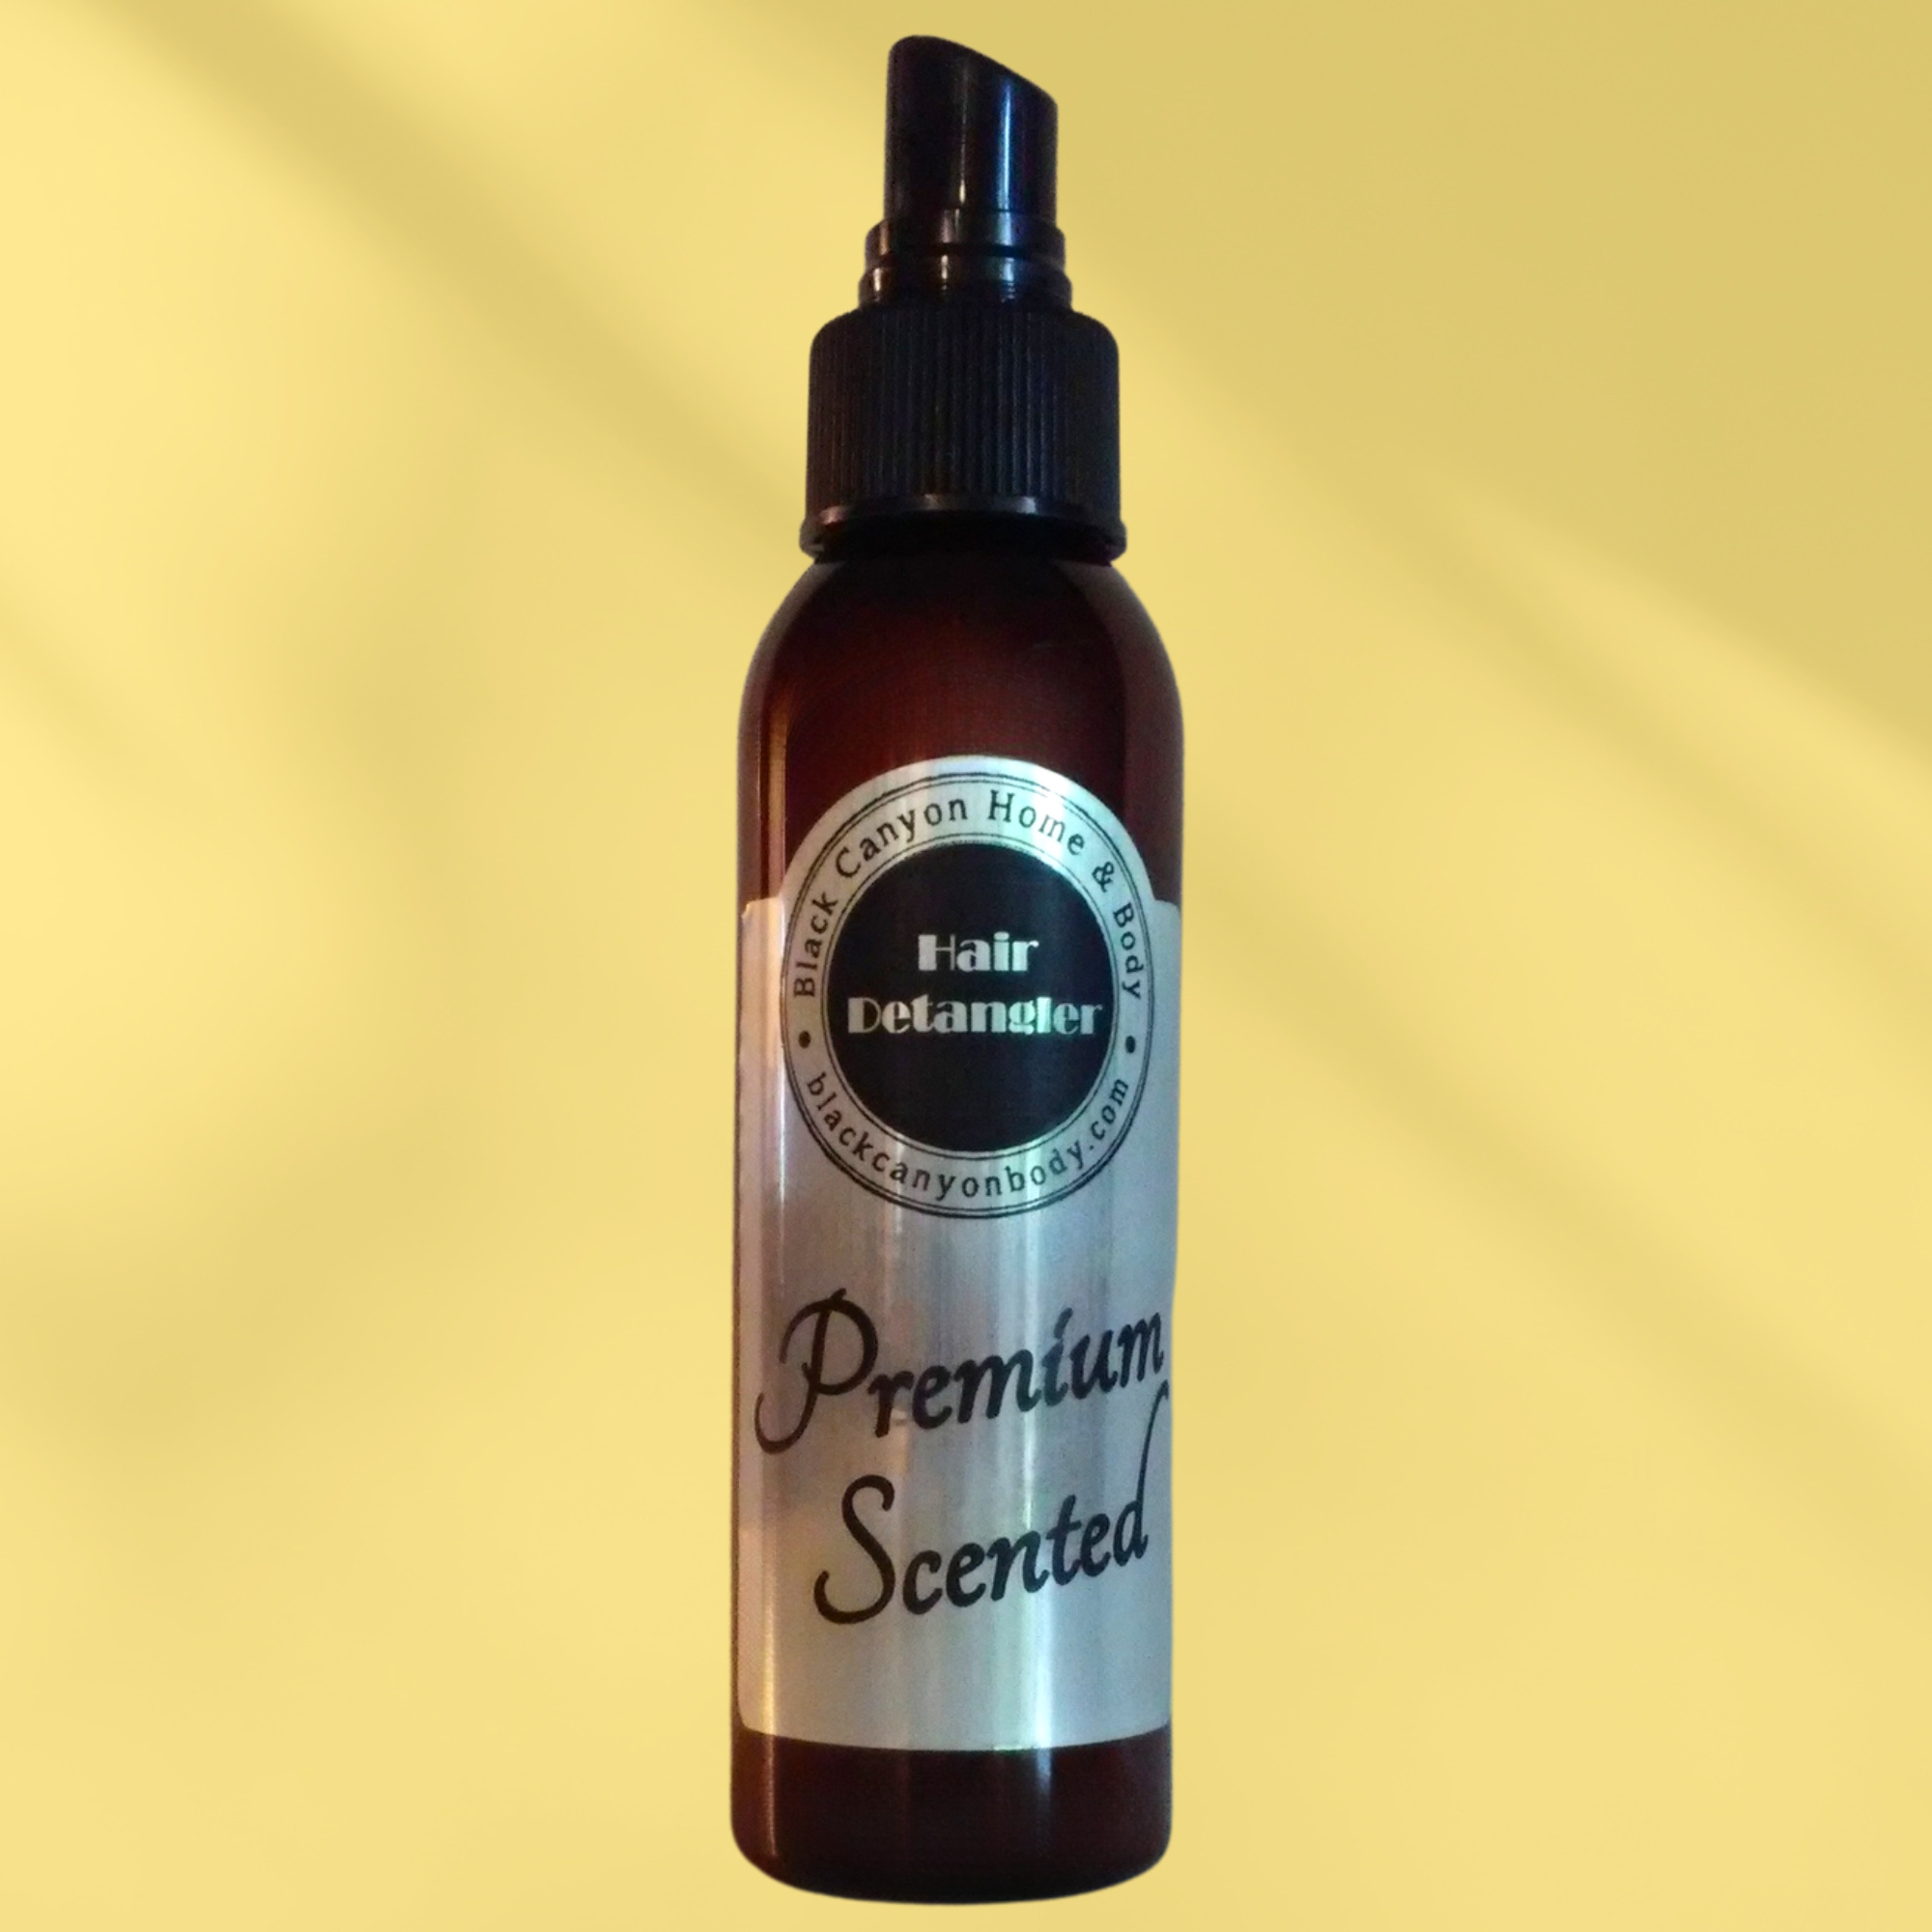 Black Canyon Autumn Equinox Scented Hair Detangler Spray with Olive Oil